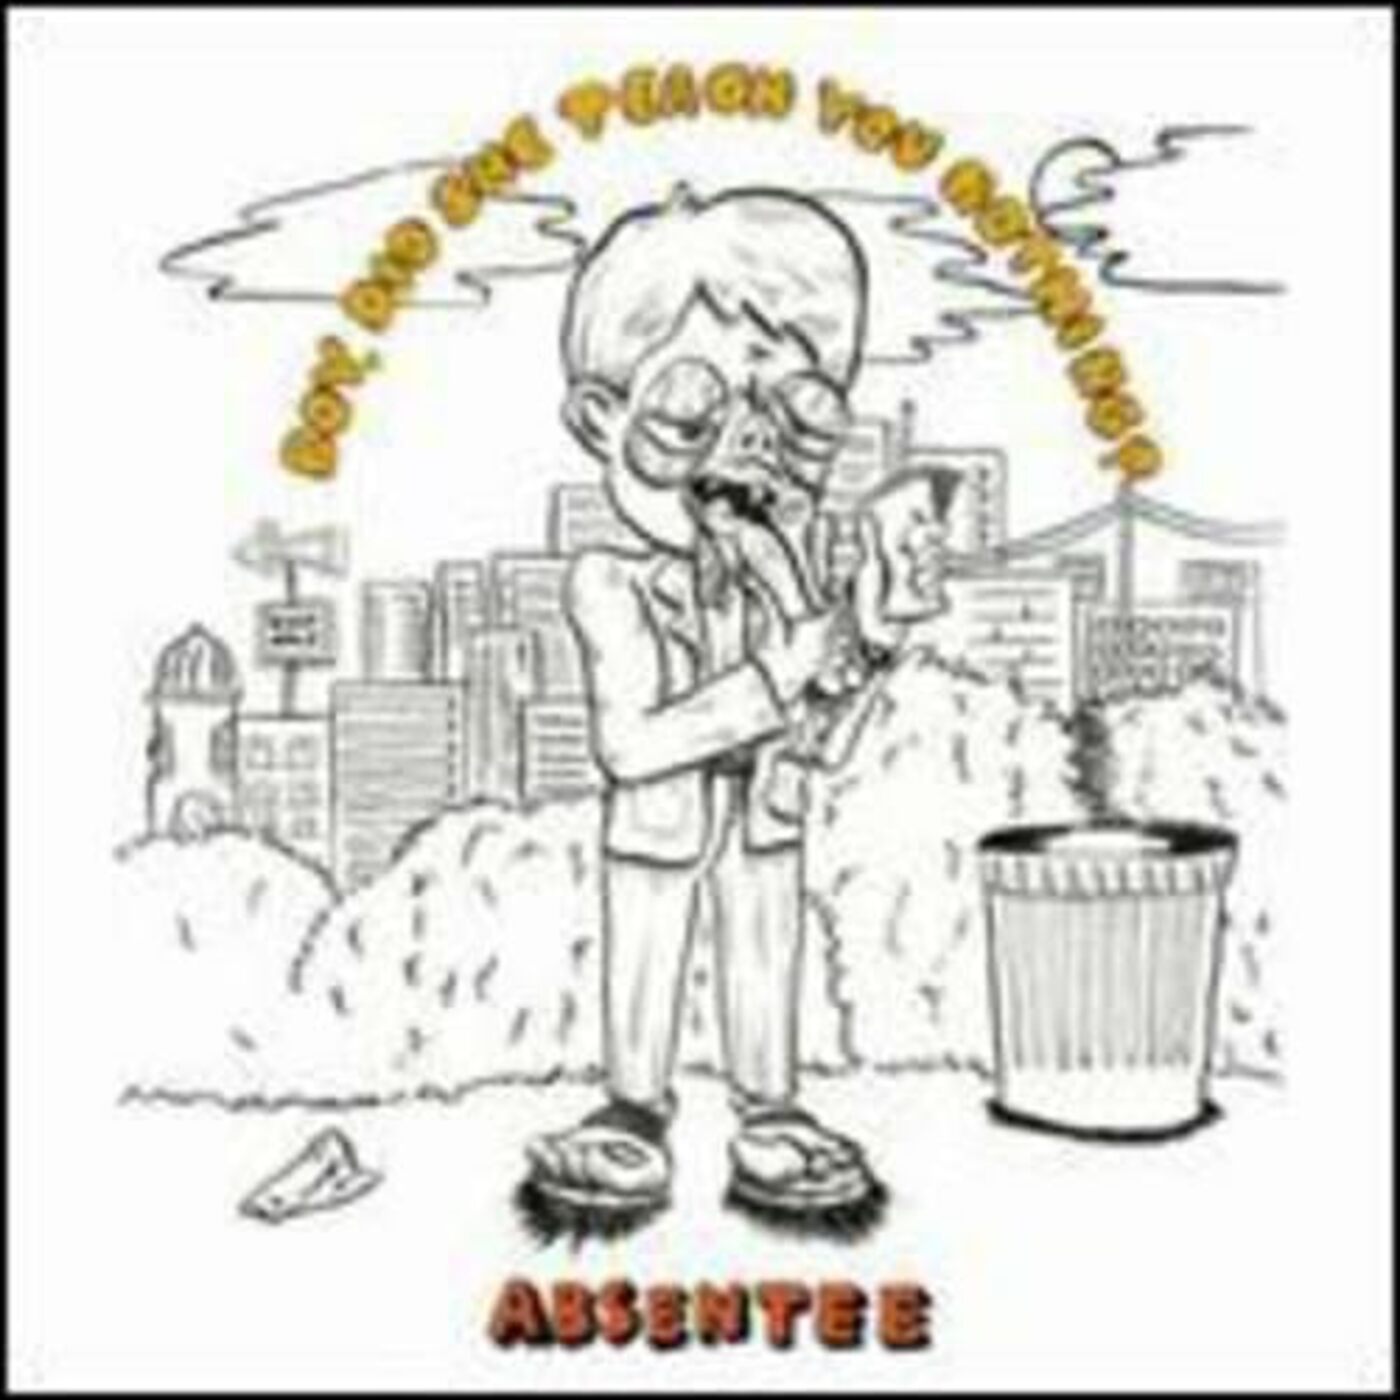 Absentee - Boy, Did She Teach You Nothing (Vinyl)